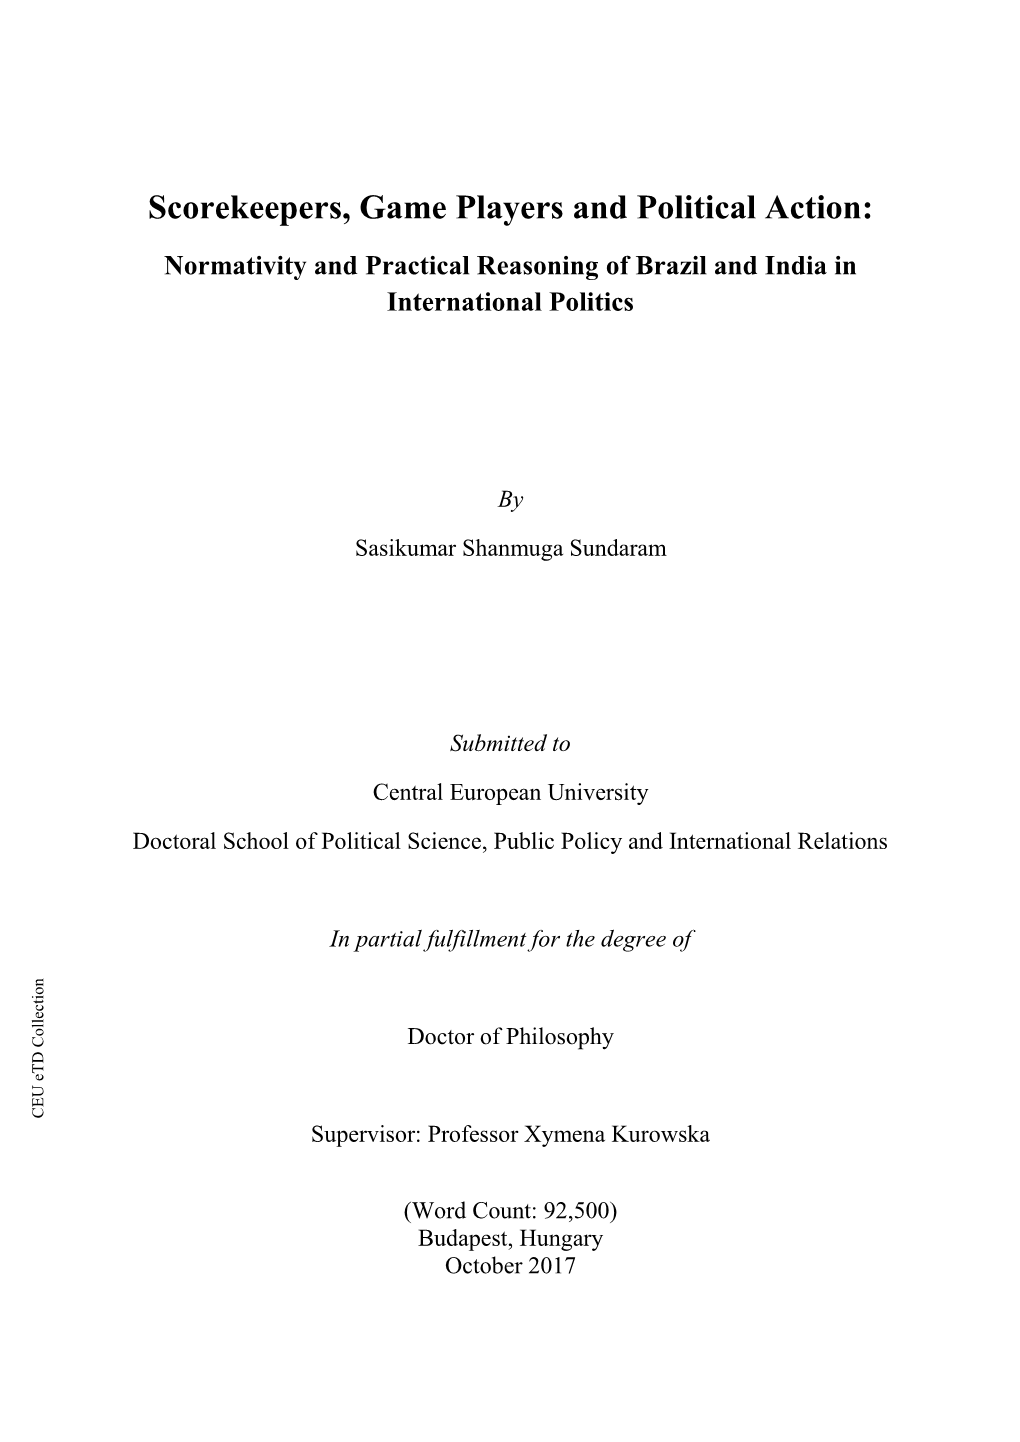 Scorekeepers, Game Players and Political Action: Normativity and Practical Reasoning of Brazil and India in International Politics